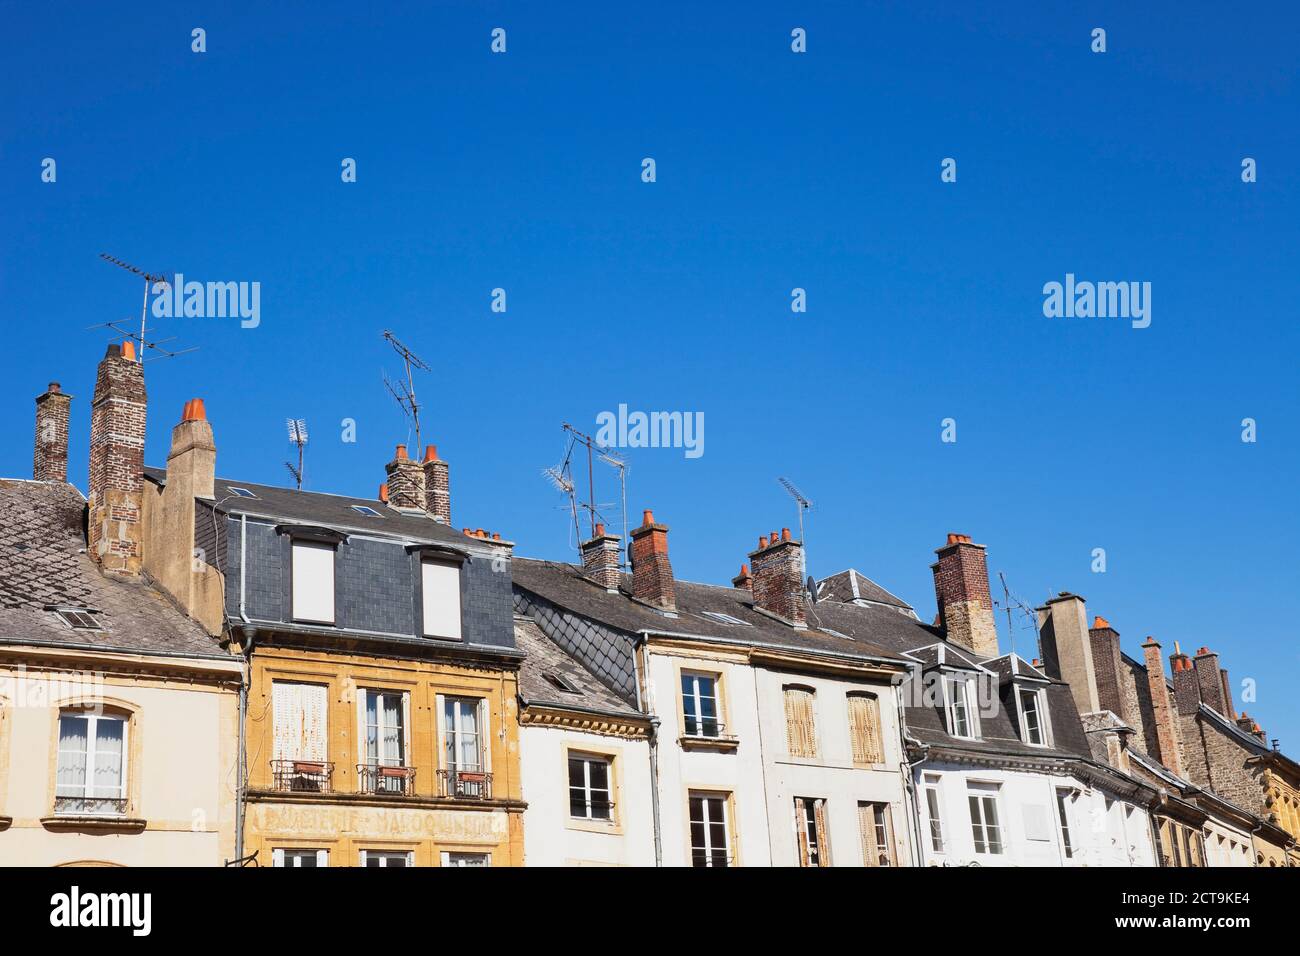 France, Champagne-Ardenne, Ardennes, Sedan, house roofs and chimneys in front of blue sky Stock Photo